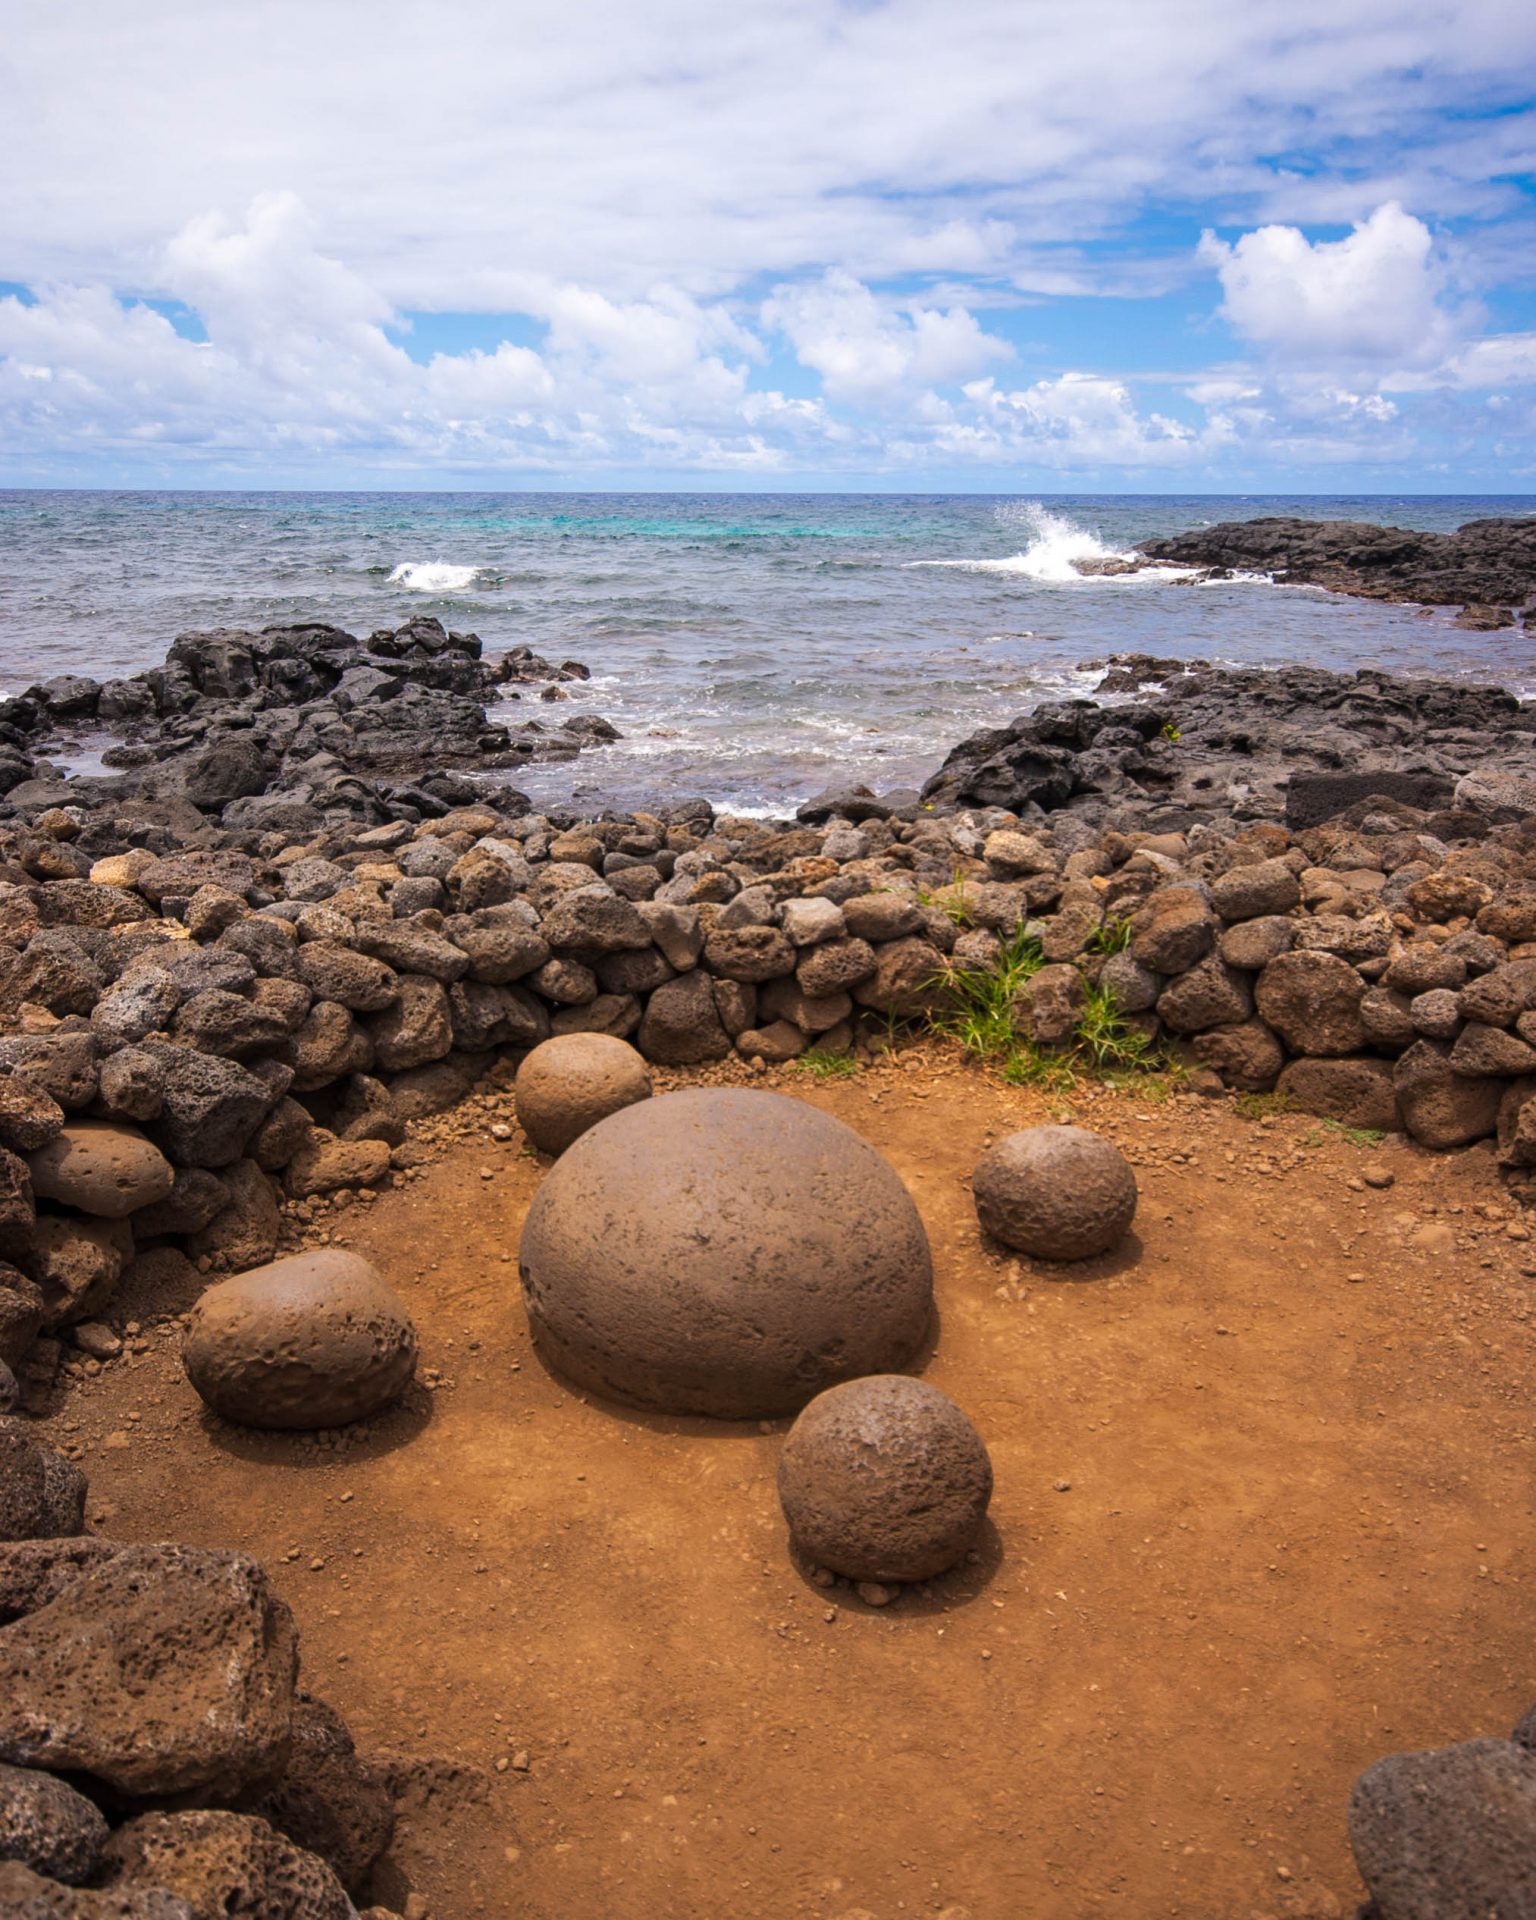 A large round rock is circled by four smaller round rocks sitting on red ground within a stone foundation. Blue skies and a wavy ocean are in the background